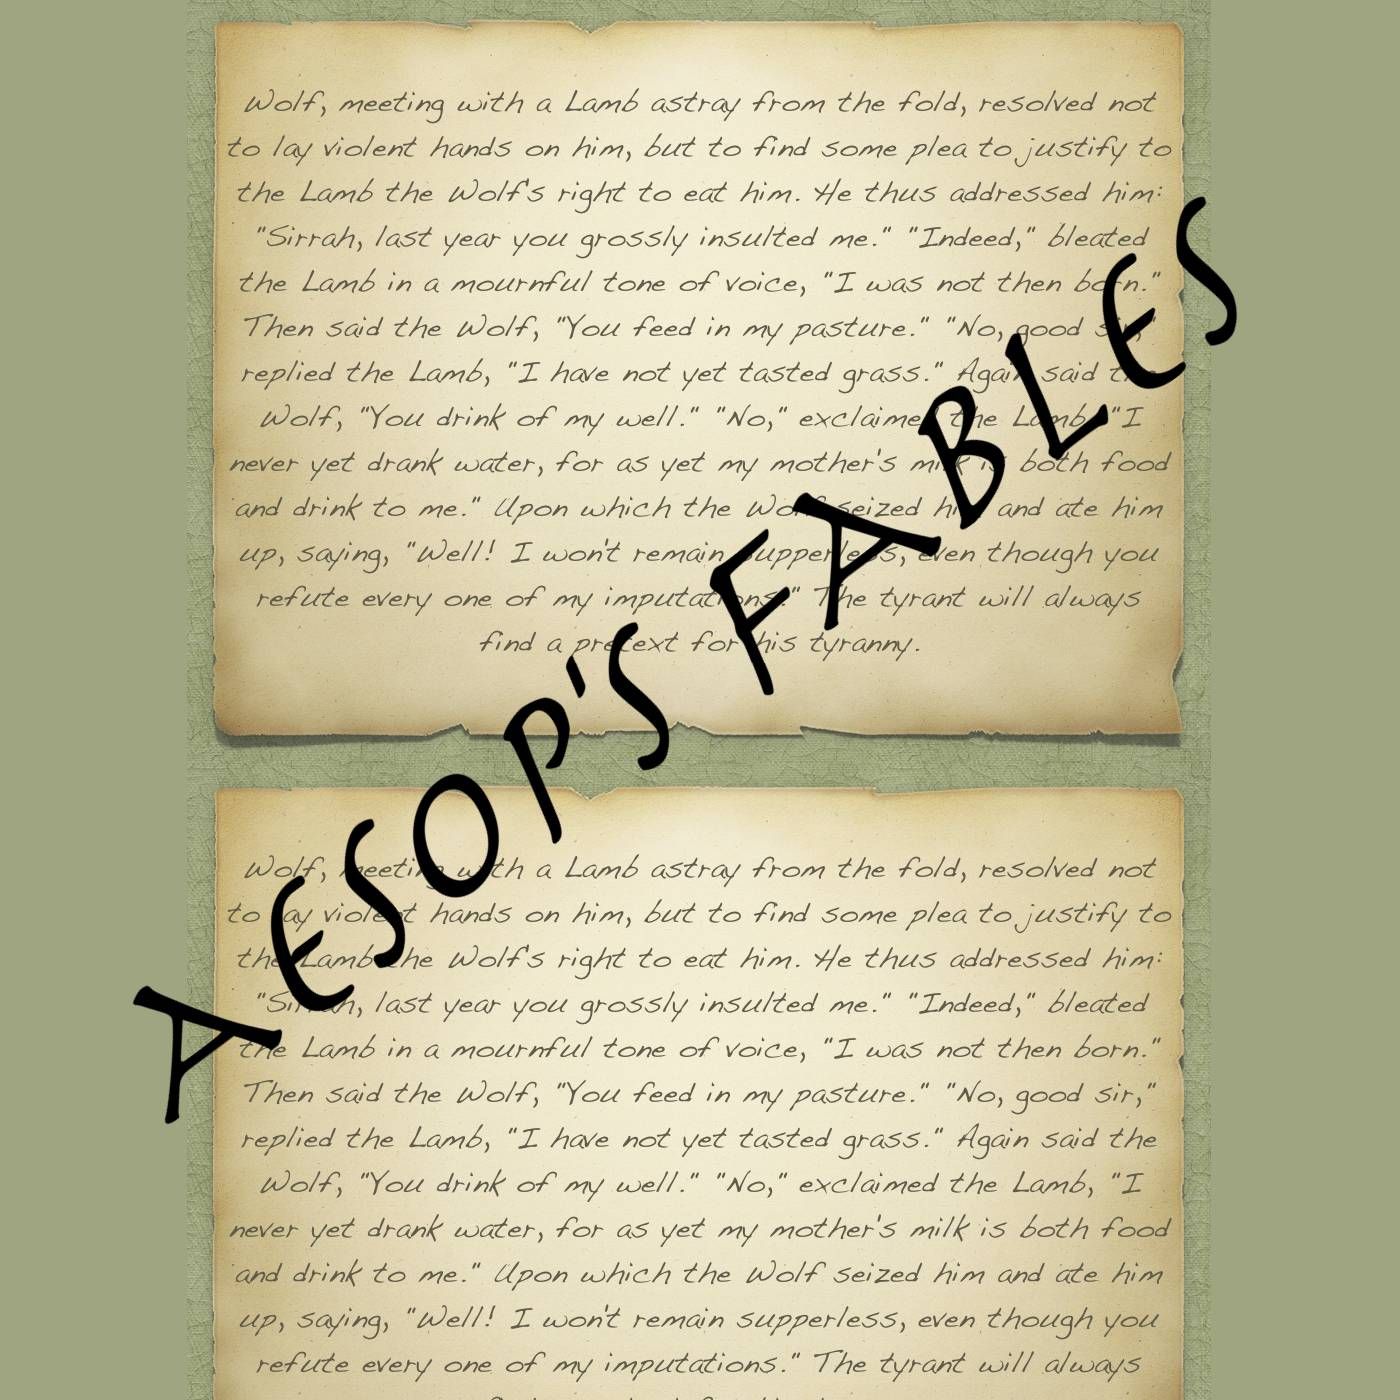 Aesop's Fables - Listening can save your life